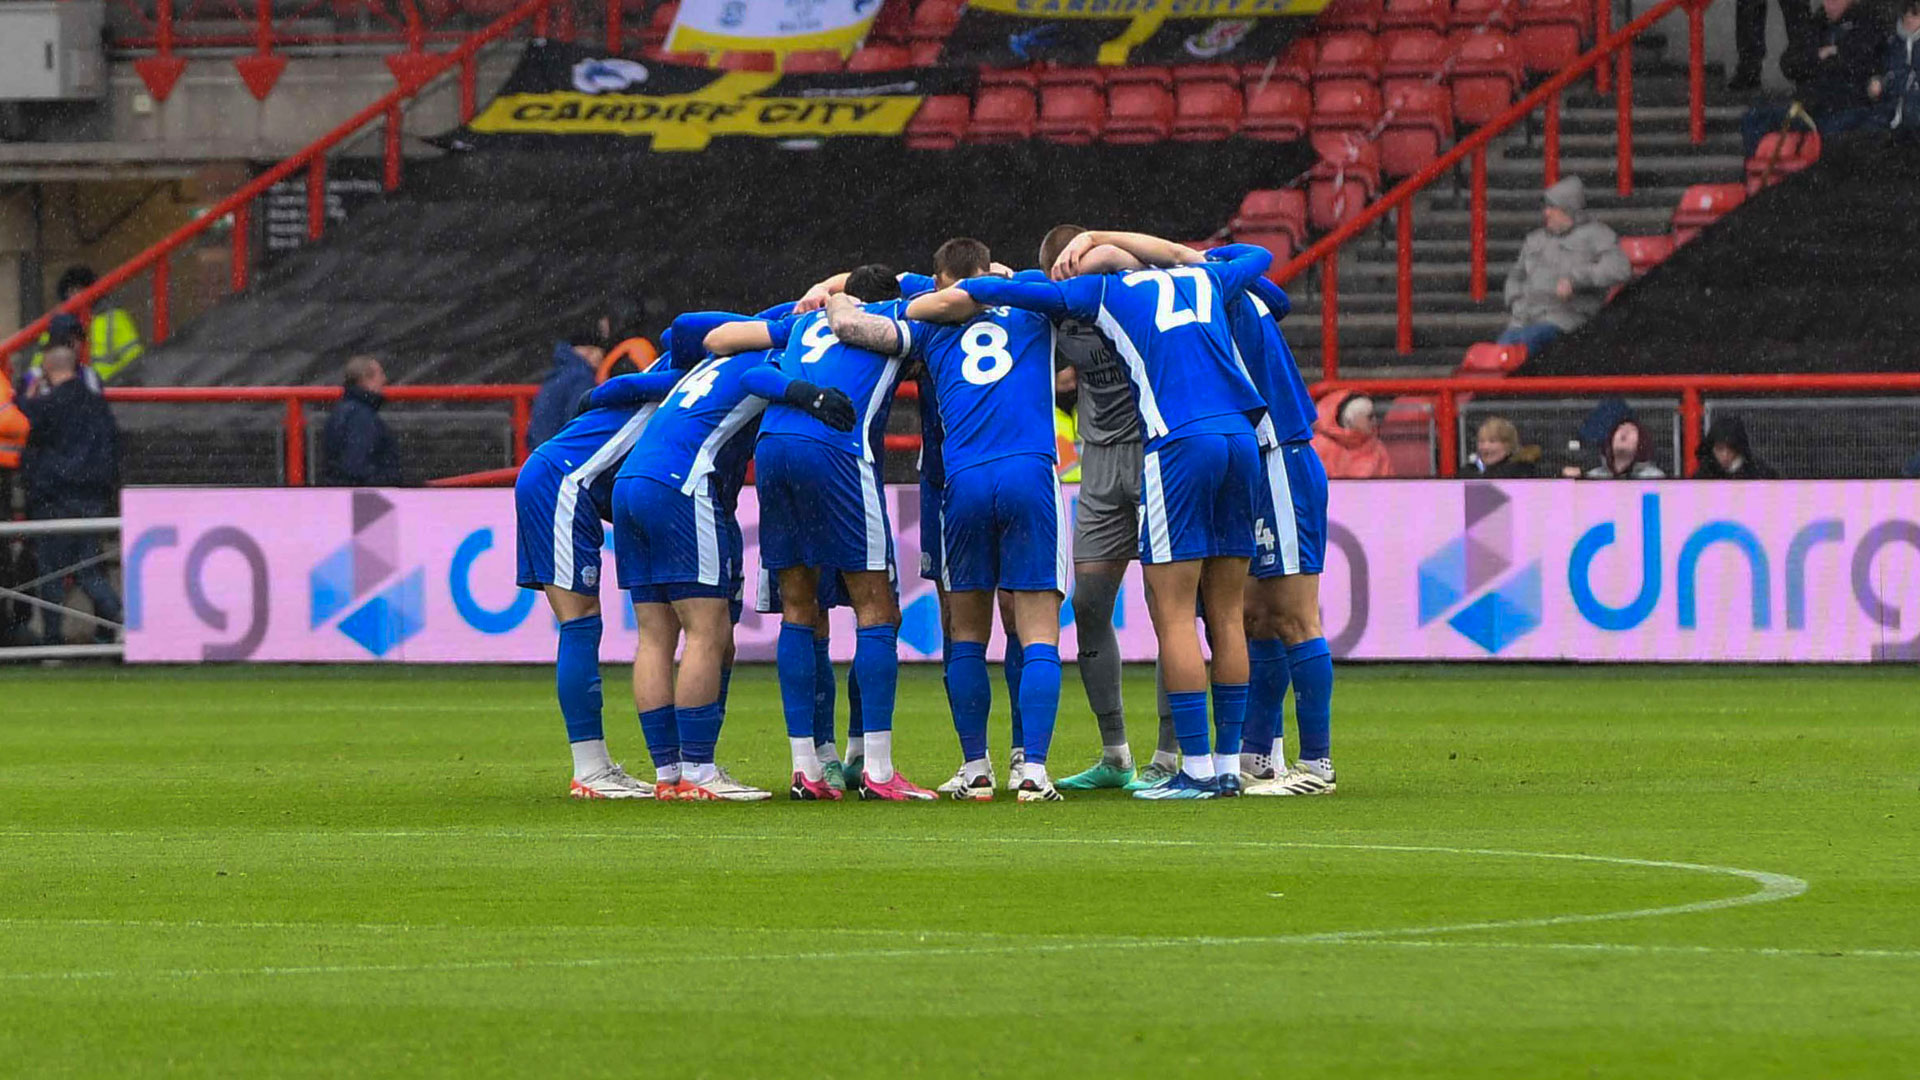 Cardiff City's players huddle ahead of kick-off against Bristol City